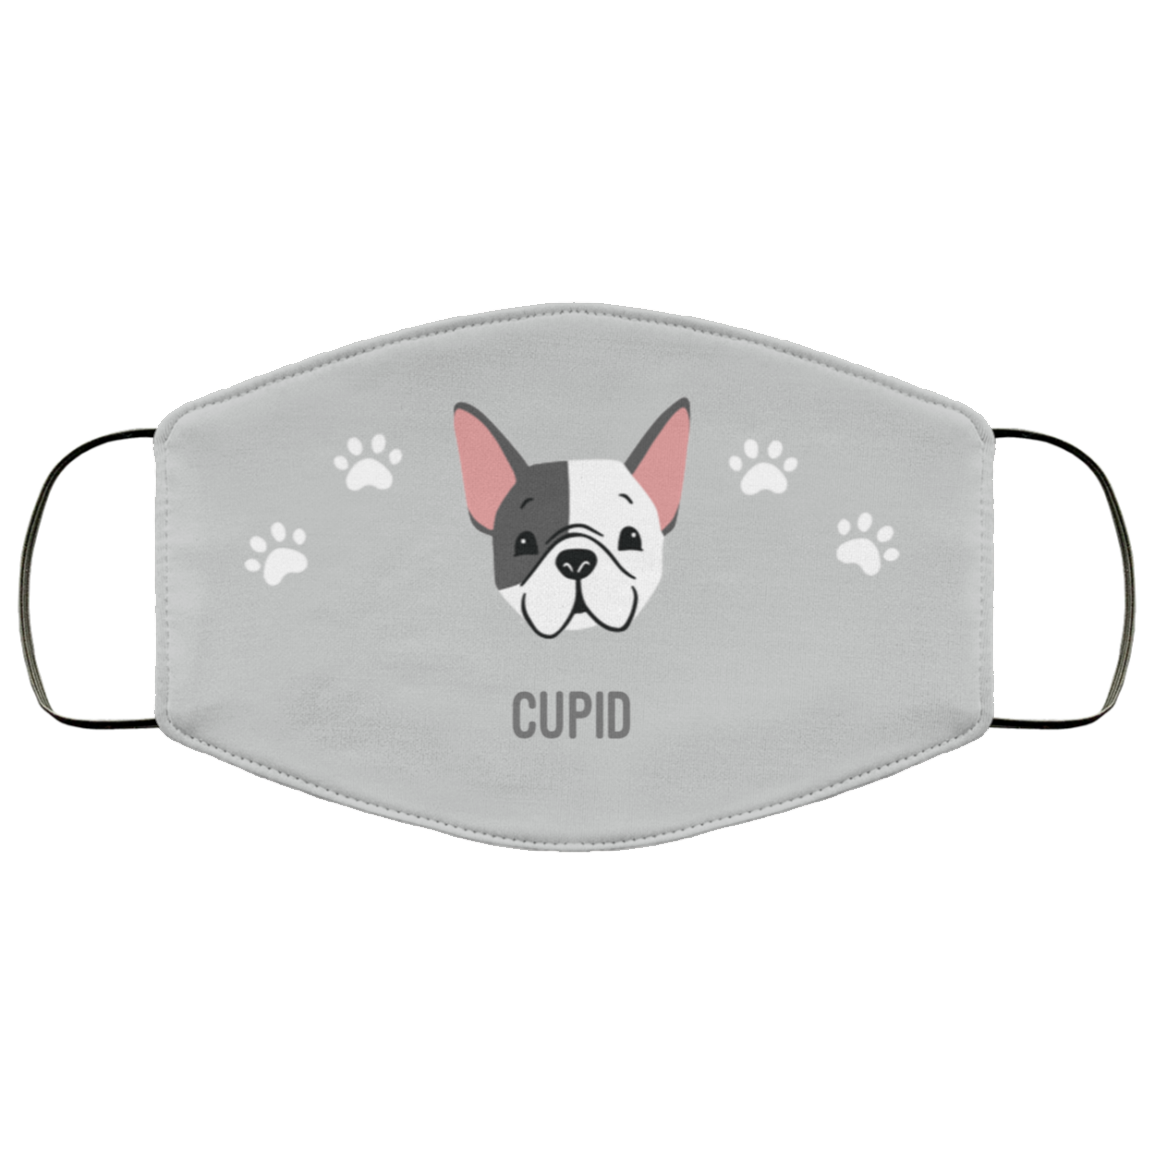 Black & White Frenchie Personalized Protective Face Covering – Silver